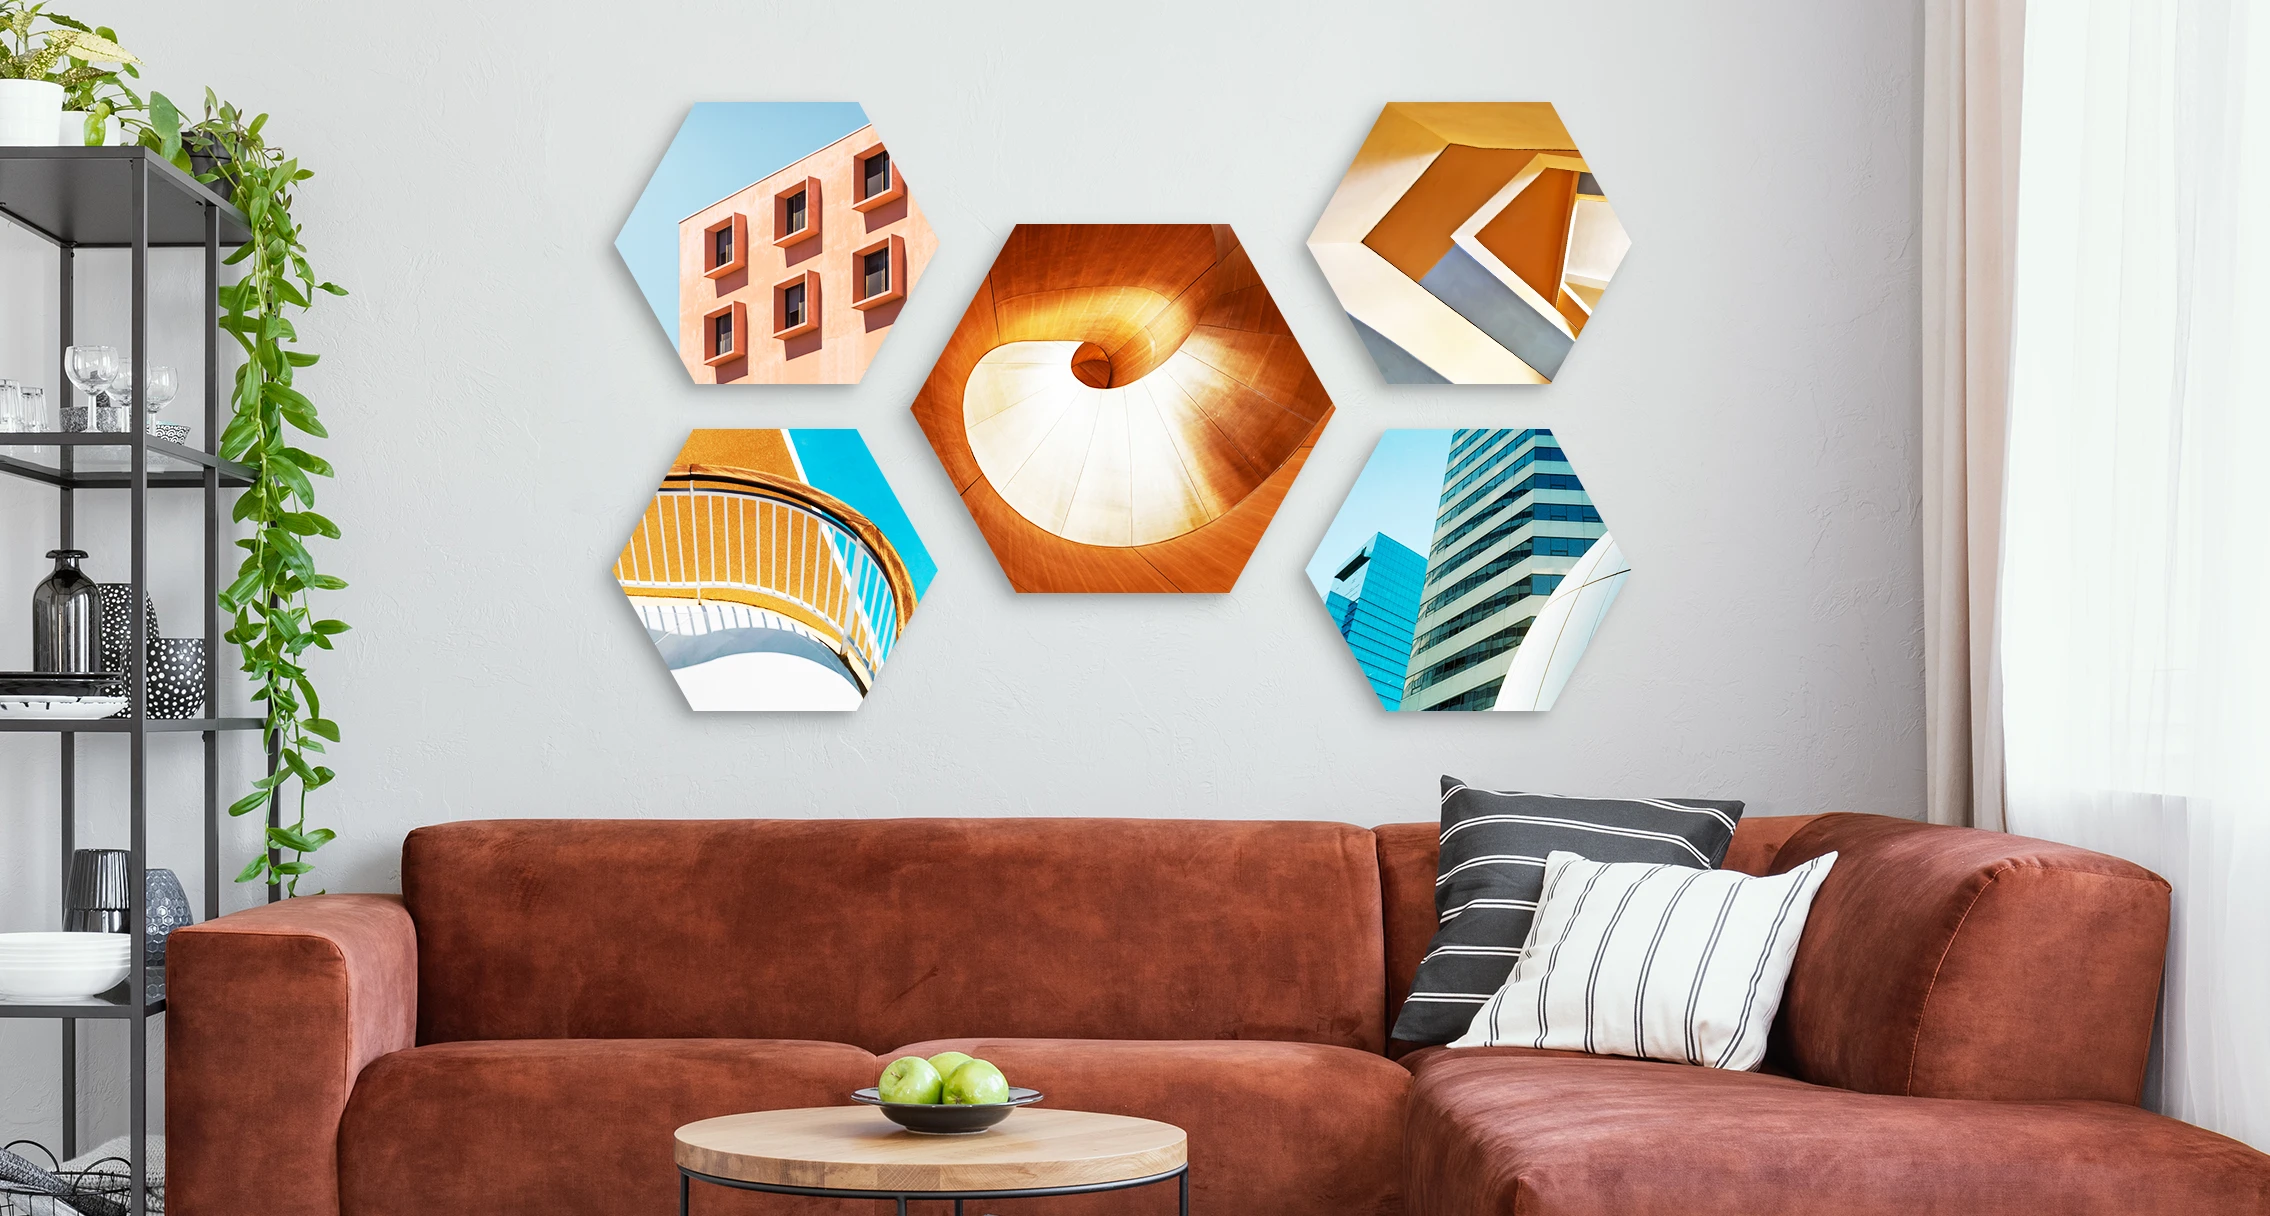 5 different architectural motifs in hexagon format hang on a wall in a living room.